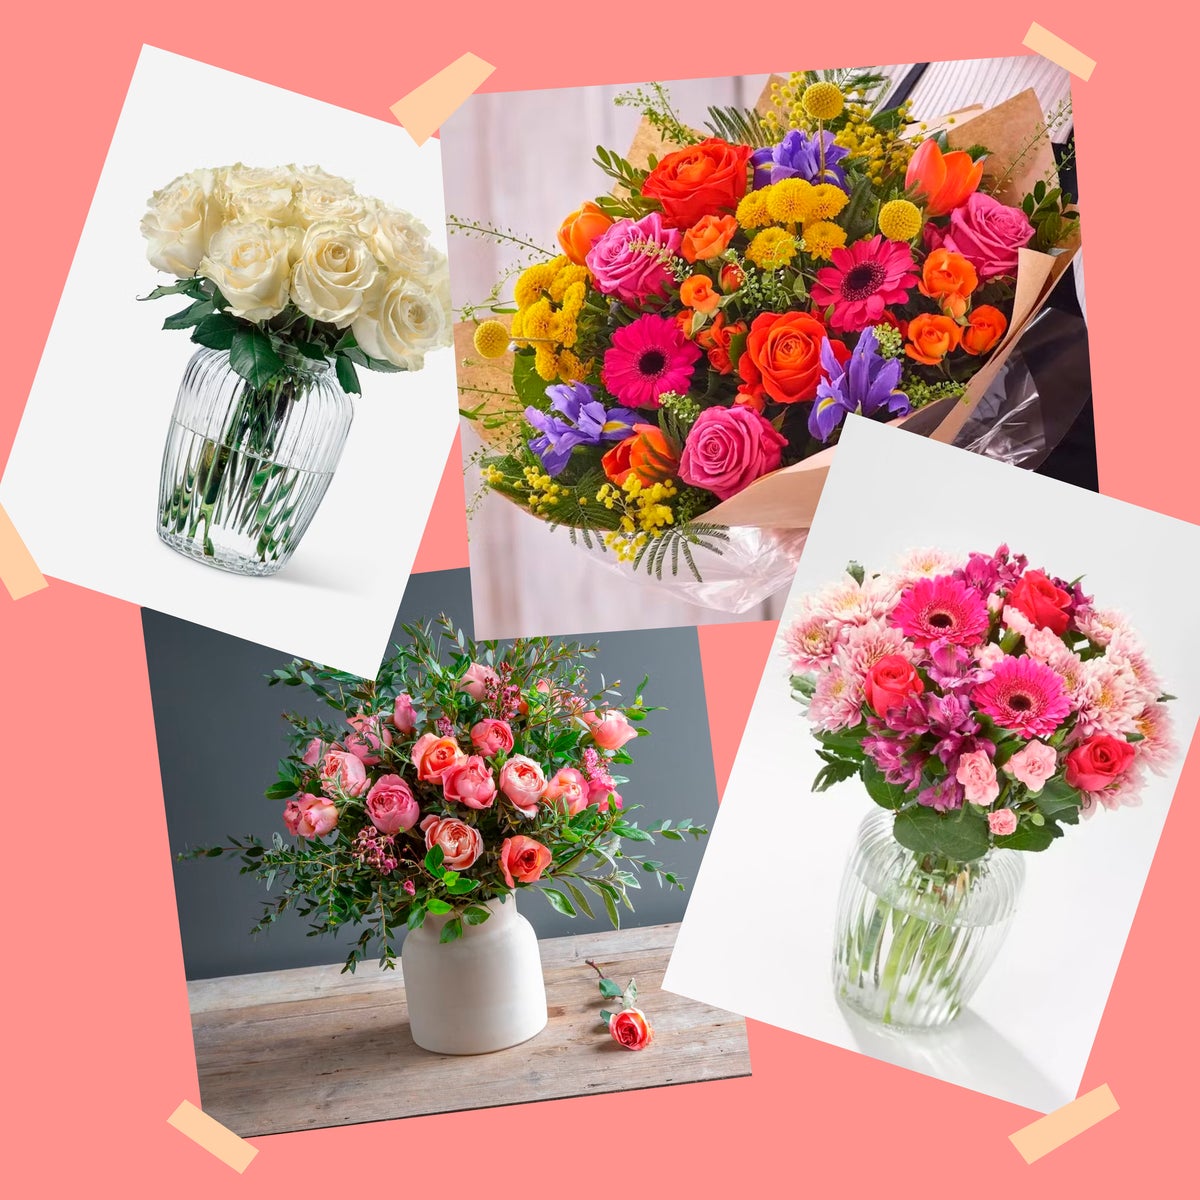 Best online flower delivery for Mother's Day UK 2023 | The Independent